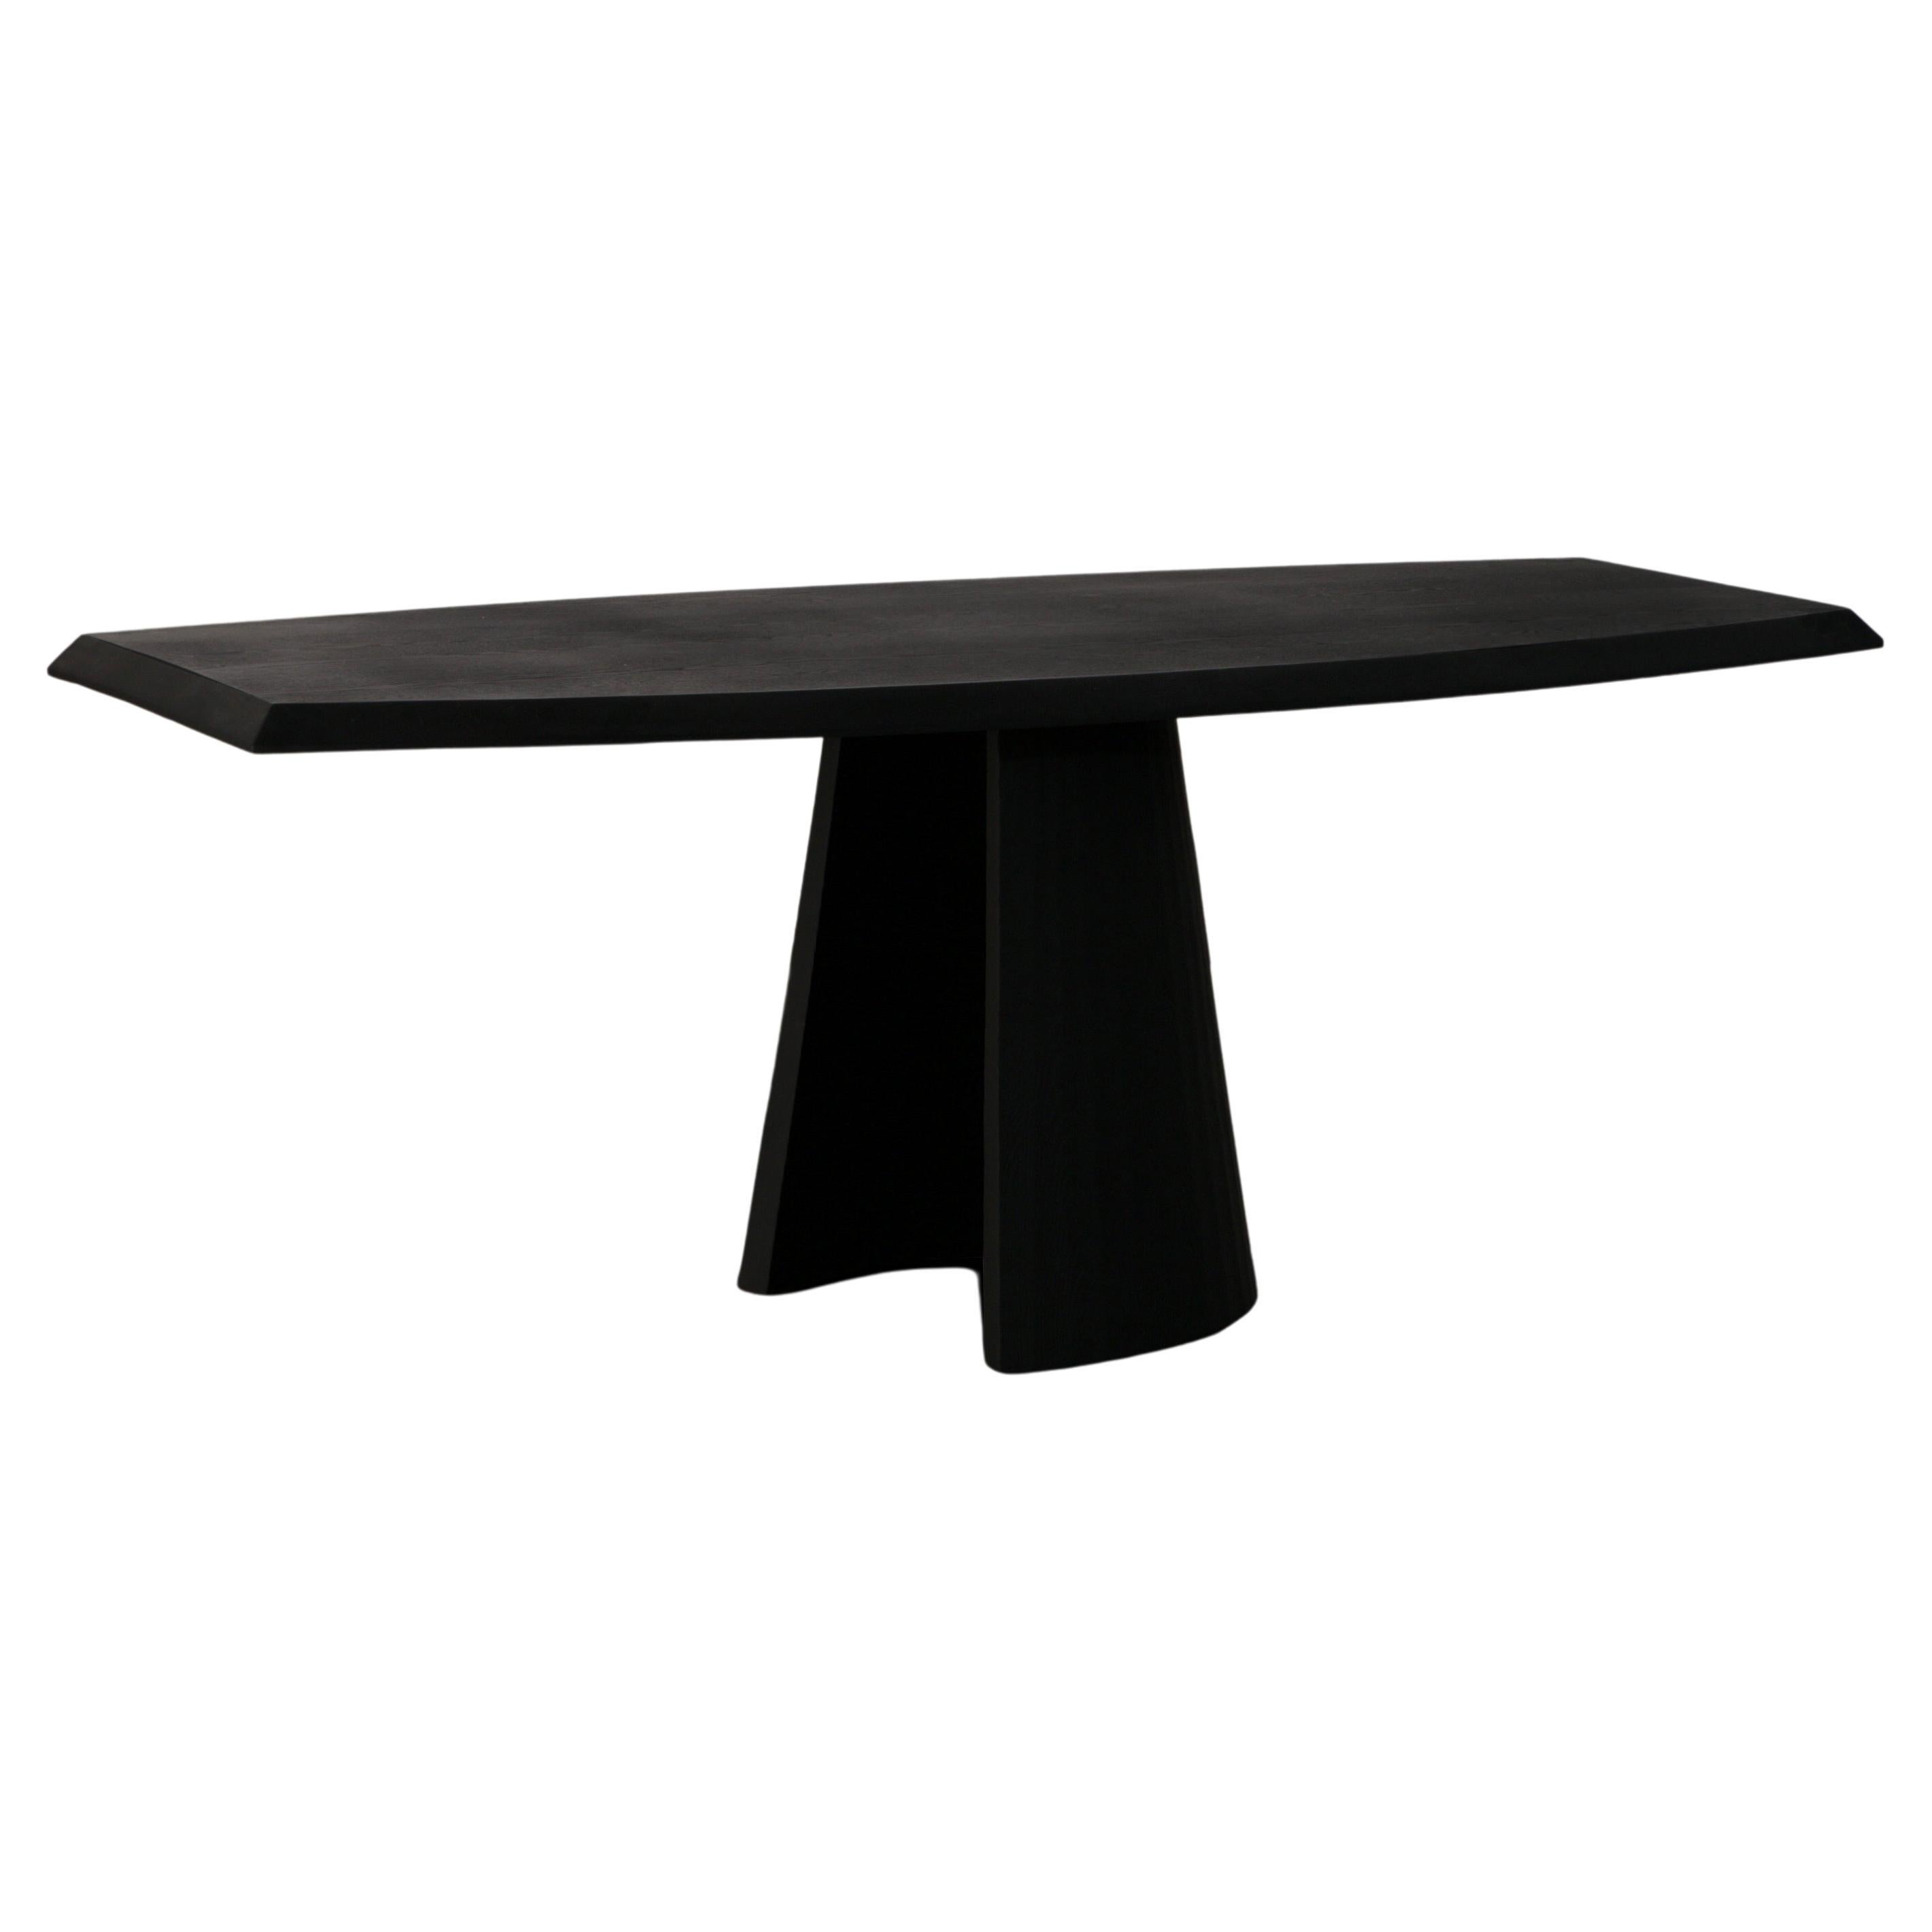 Solid Wood Sculpture Base Olive Shaped Tabletop Dining Table by Mirk Woo